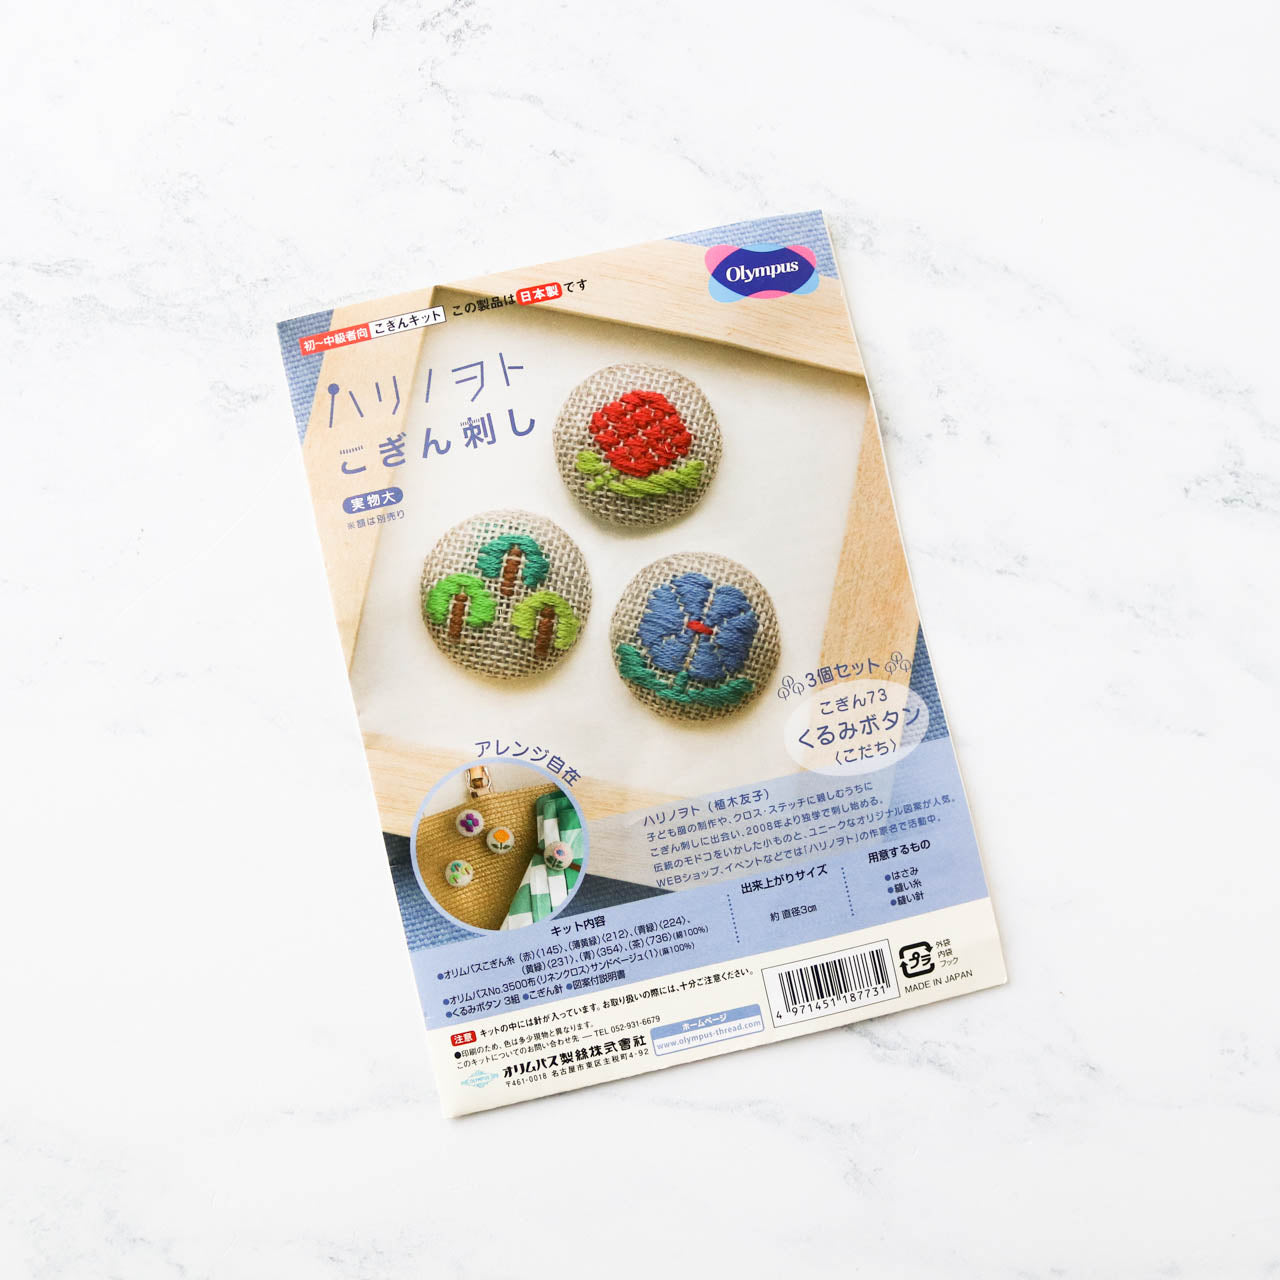 Kogin Embroidery Covered Button Kit - Floral Set 2 - Stitched Modern